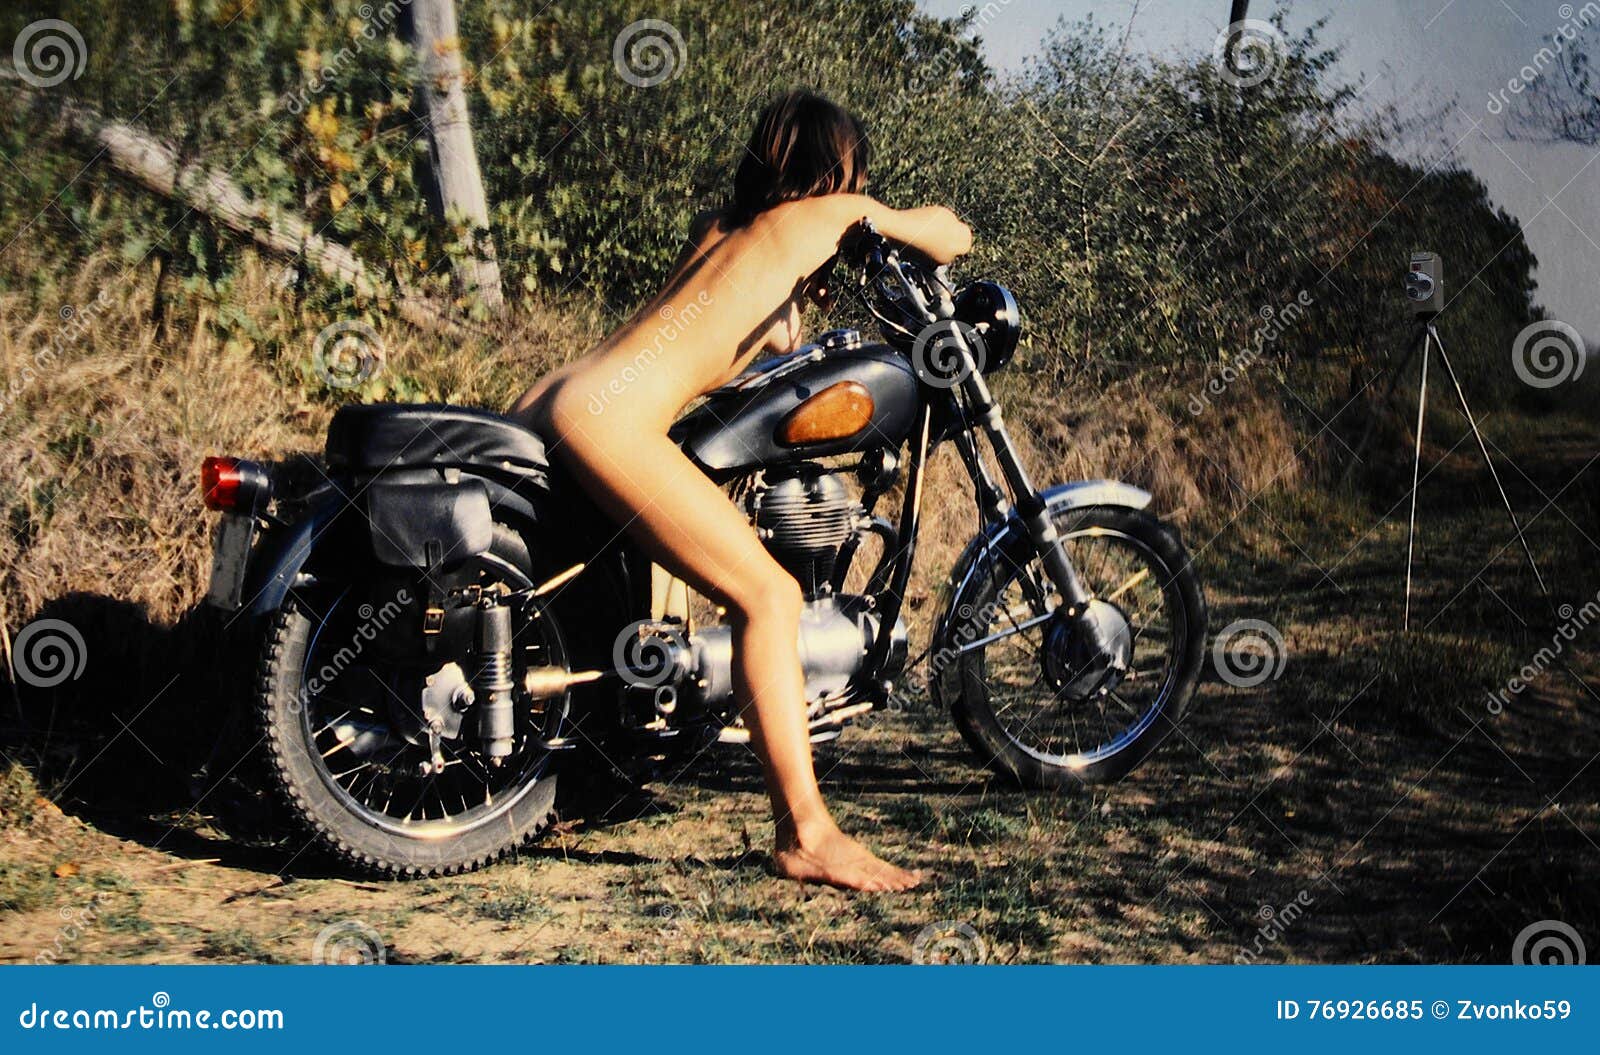 hot naked girls on motorcycles